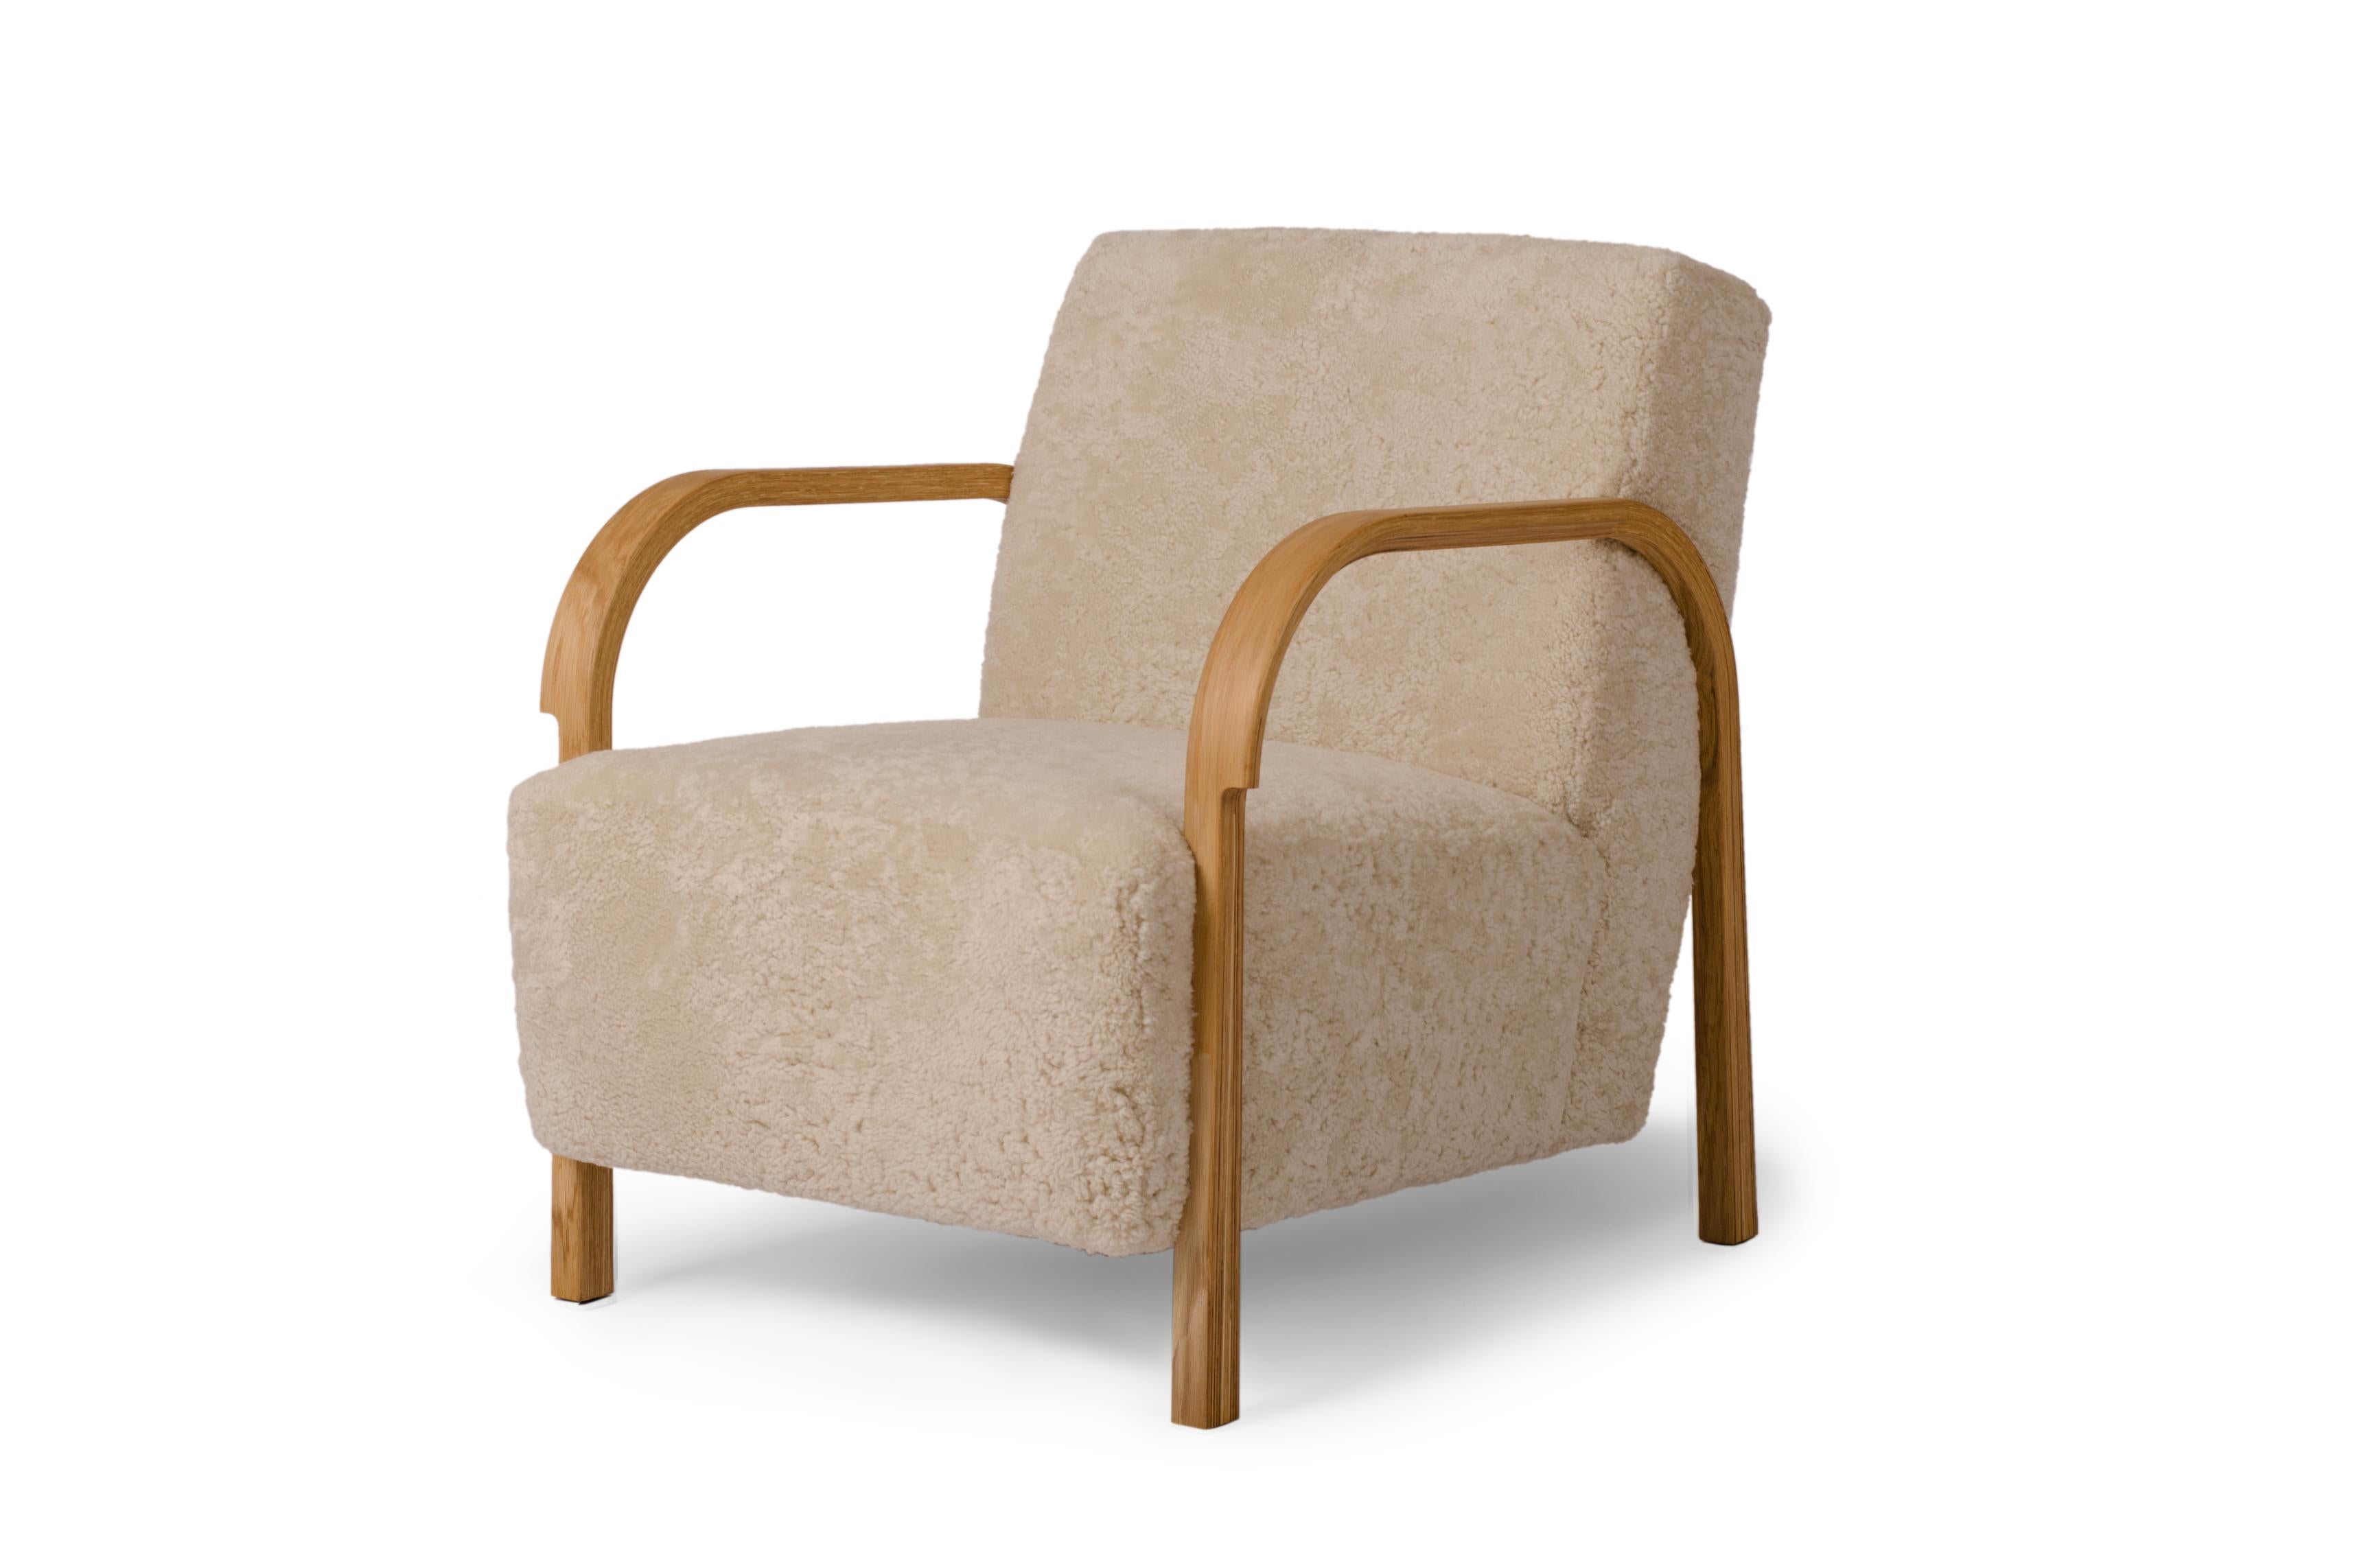 Sheepskin ARCH lounge chair by Mazo Design
Dimensions: W 69 x D 79 x H 76 cm
Materials: Oak, Sheepskin.

With the new ARCH collection, mazo forges new paths with their forward-looking modernism. The series is a tribute to the renowned Danish